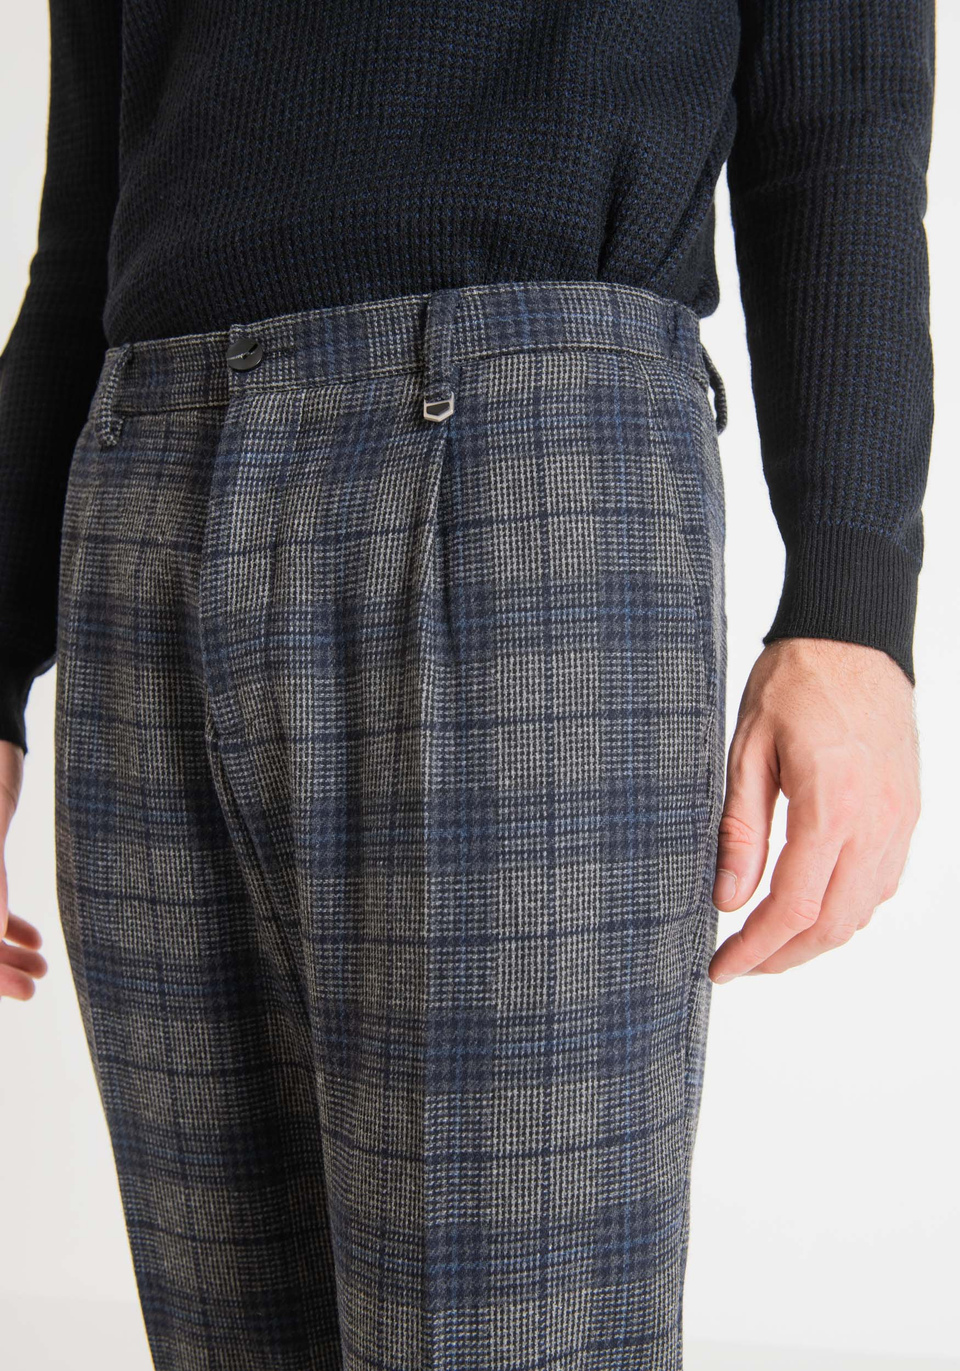 "GUSTAF" CARROT FIT TROUSERS IN WARM WOOL-BLEND FABRIC WITH PRINCE OF WALES PATTERN - Antony Morato Online Shop